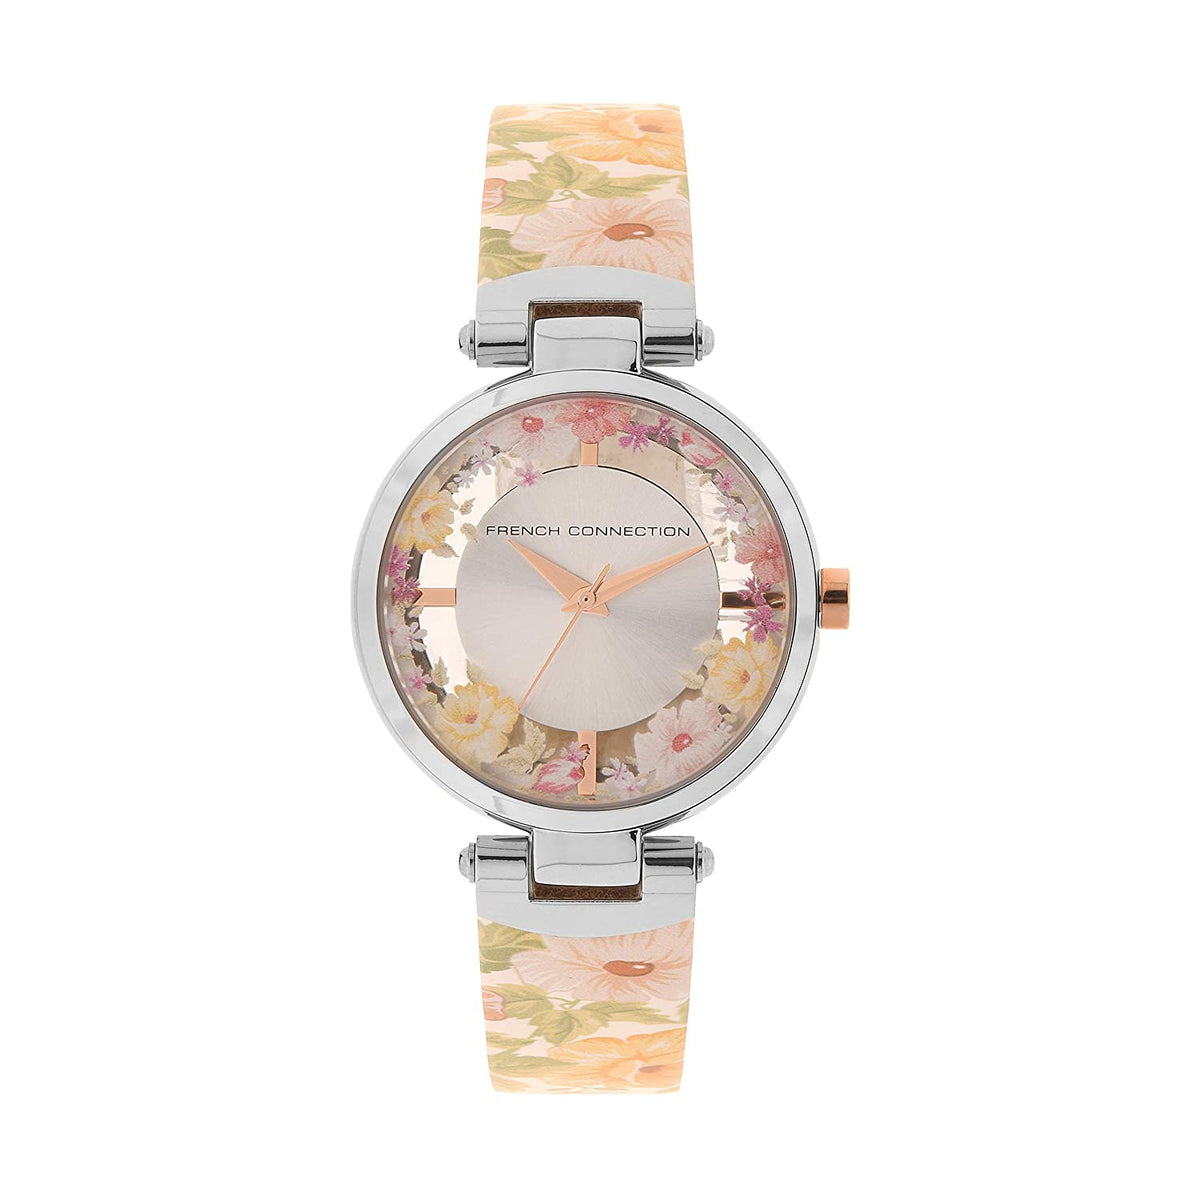 French Connection Analog Silver Dial Women's Watch-FCL0003B